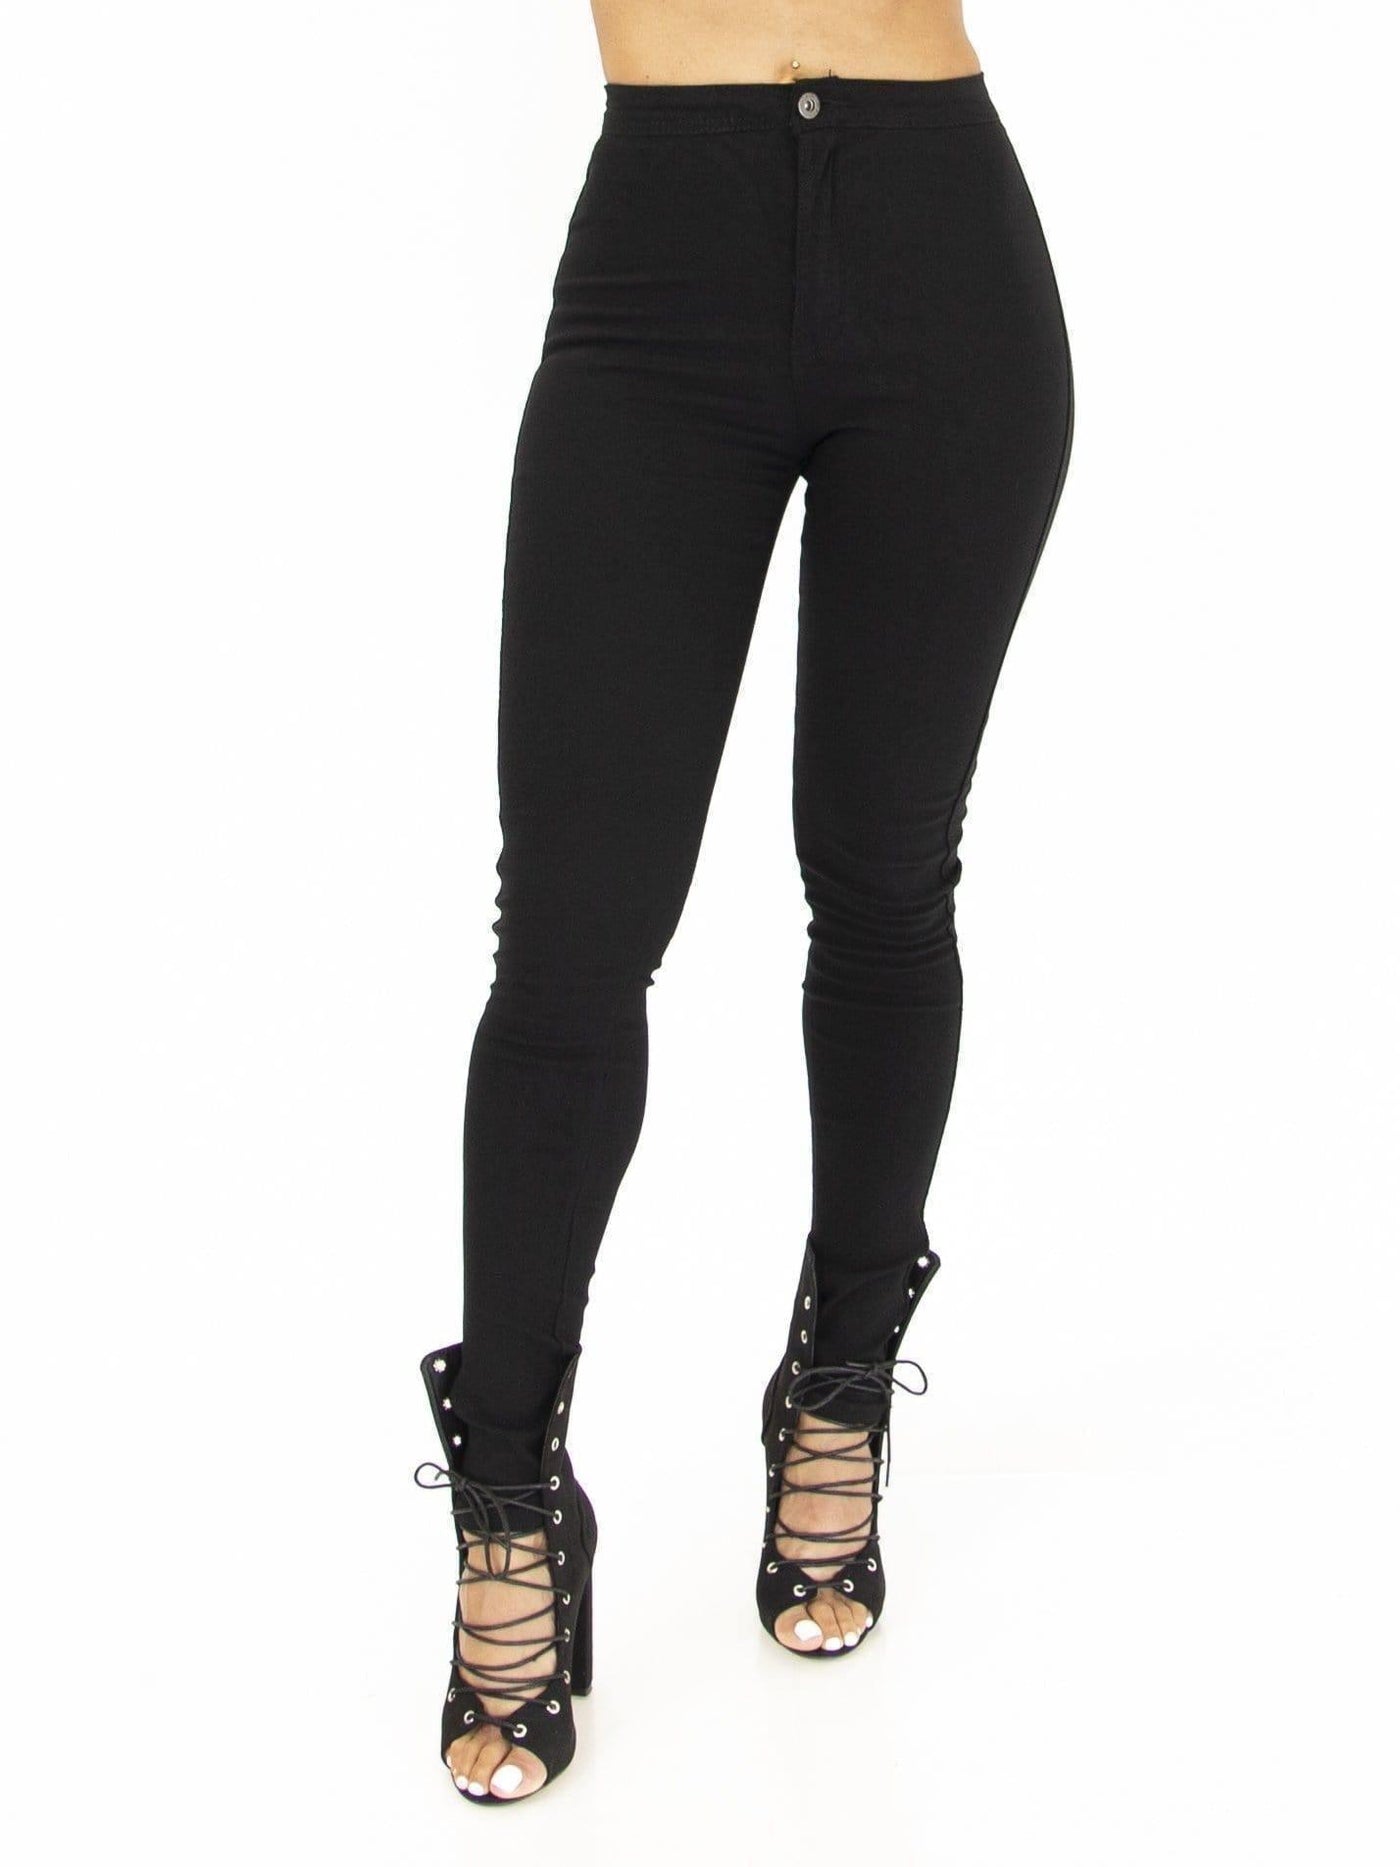 Stretchy Delight | Black Pants - Statement Piece NY _tab_final-sale, _tab_size-chart, Black, Bottoms, Brooklyn Boutique, Colorful, Fall, Fall Fashion, Long Pants, Misses, Monochrome, not clearance, pants, Ships from USA, Skinny Fit, small, SPNY Exclusive, Standard Fall, statement, Statement Clothing, statement piece, Statement Piece Boutique, statement piece ny, Statement Pieces, Statement Pieces Boutique, Women's Boutique, Workwear, X-Large, XL Pants